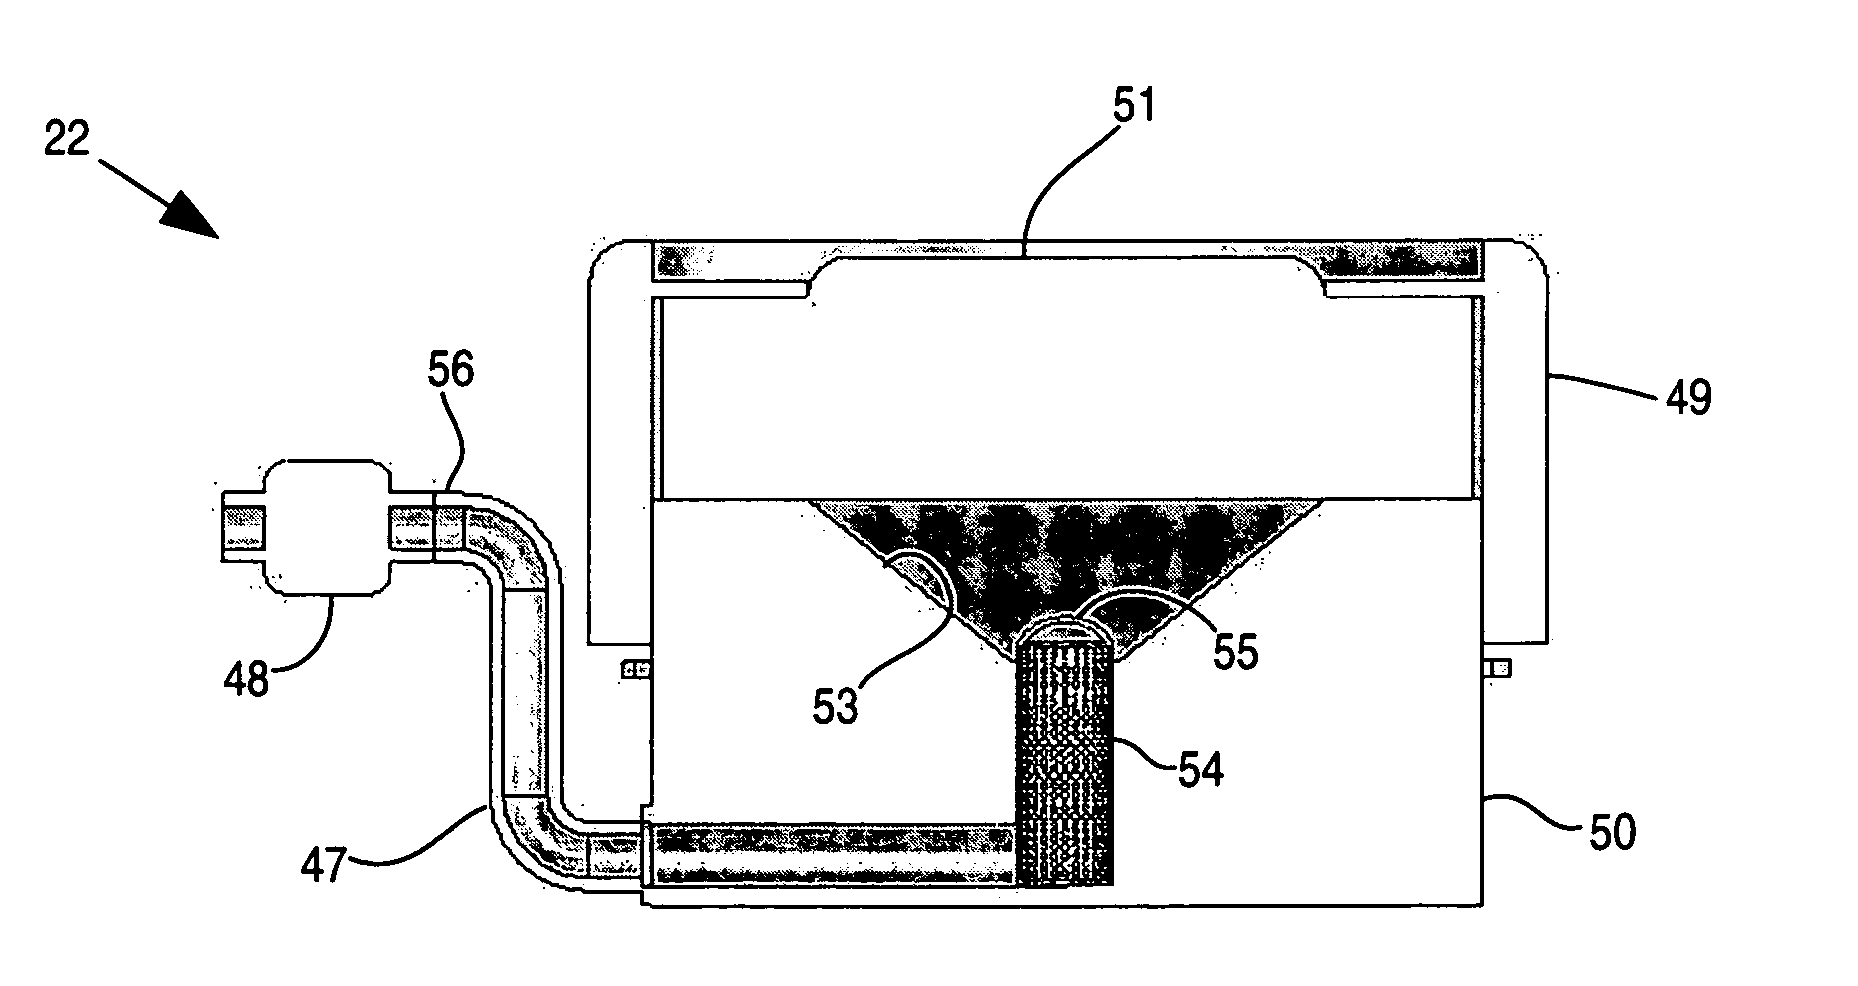 Apparatus and method for delivery of therapeutic and other types of agents